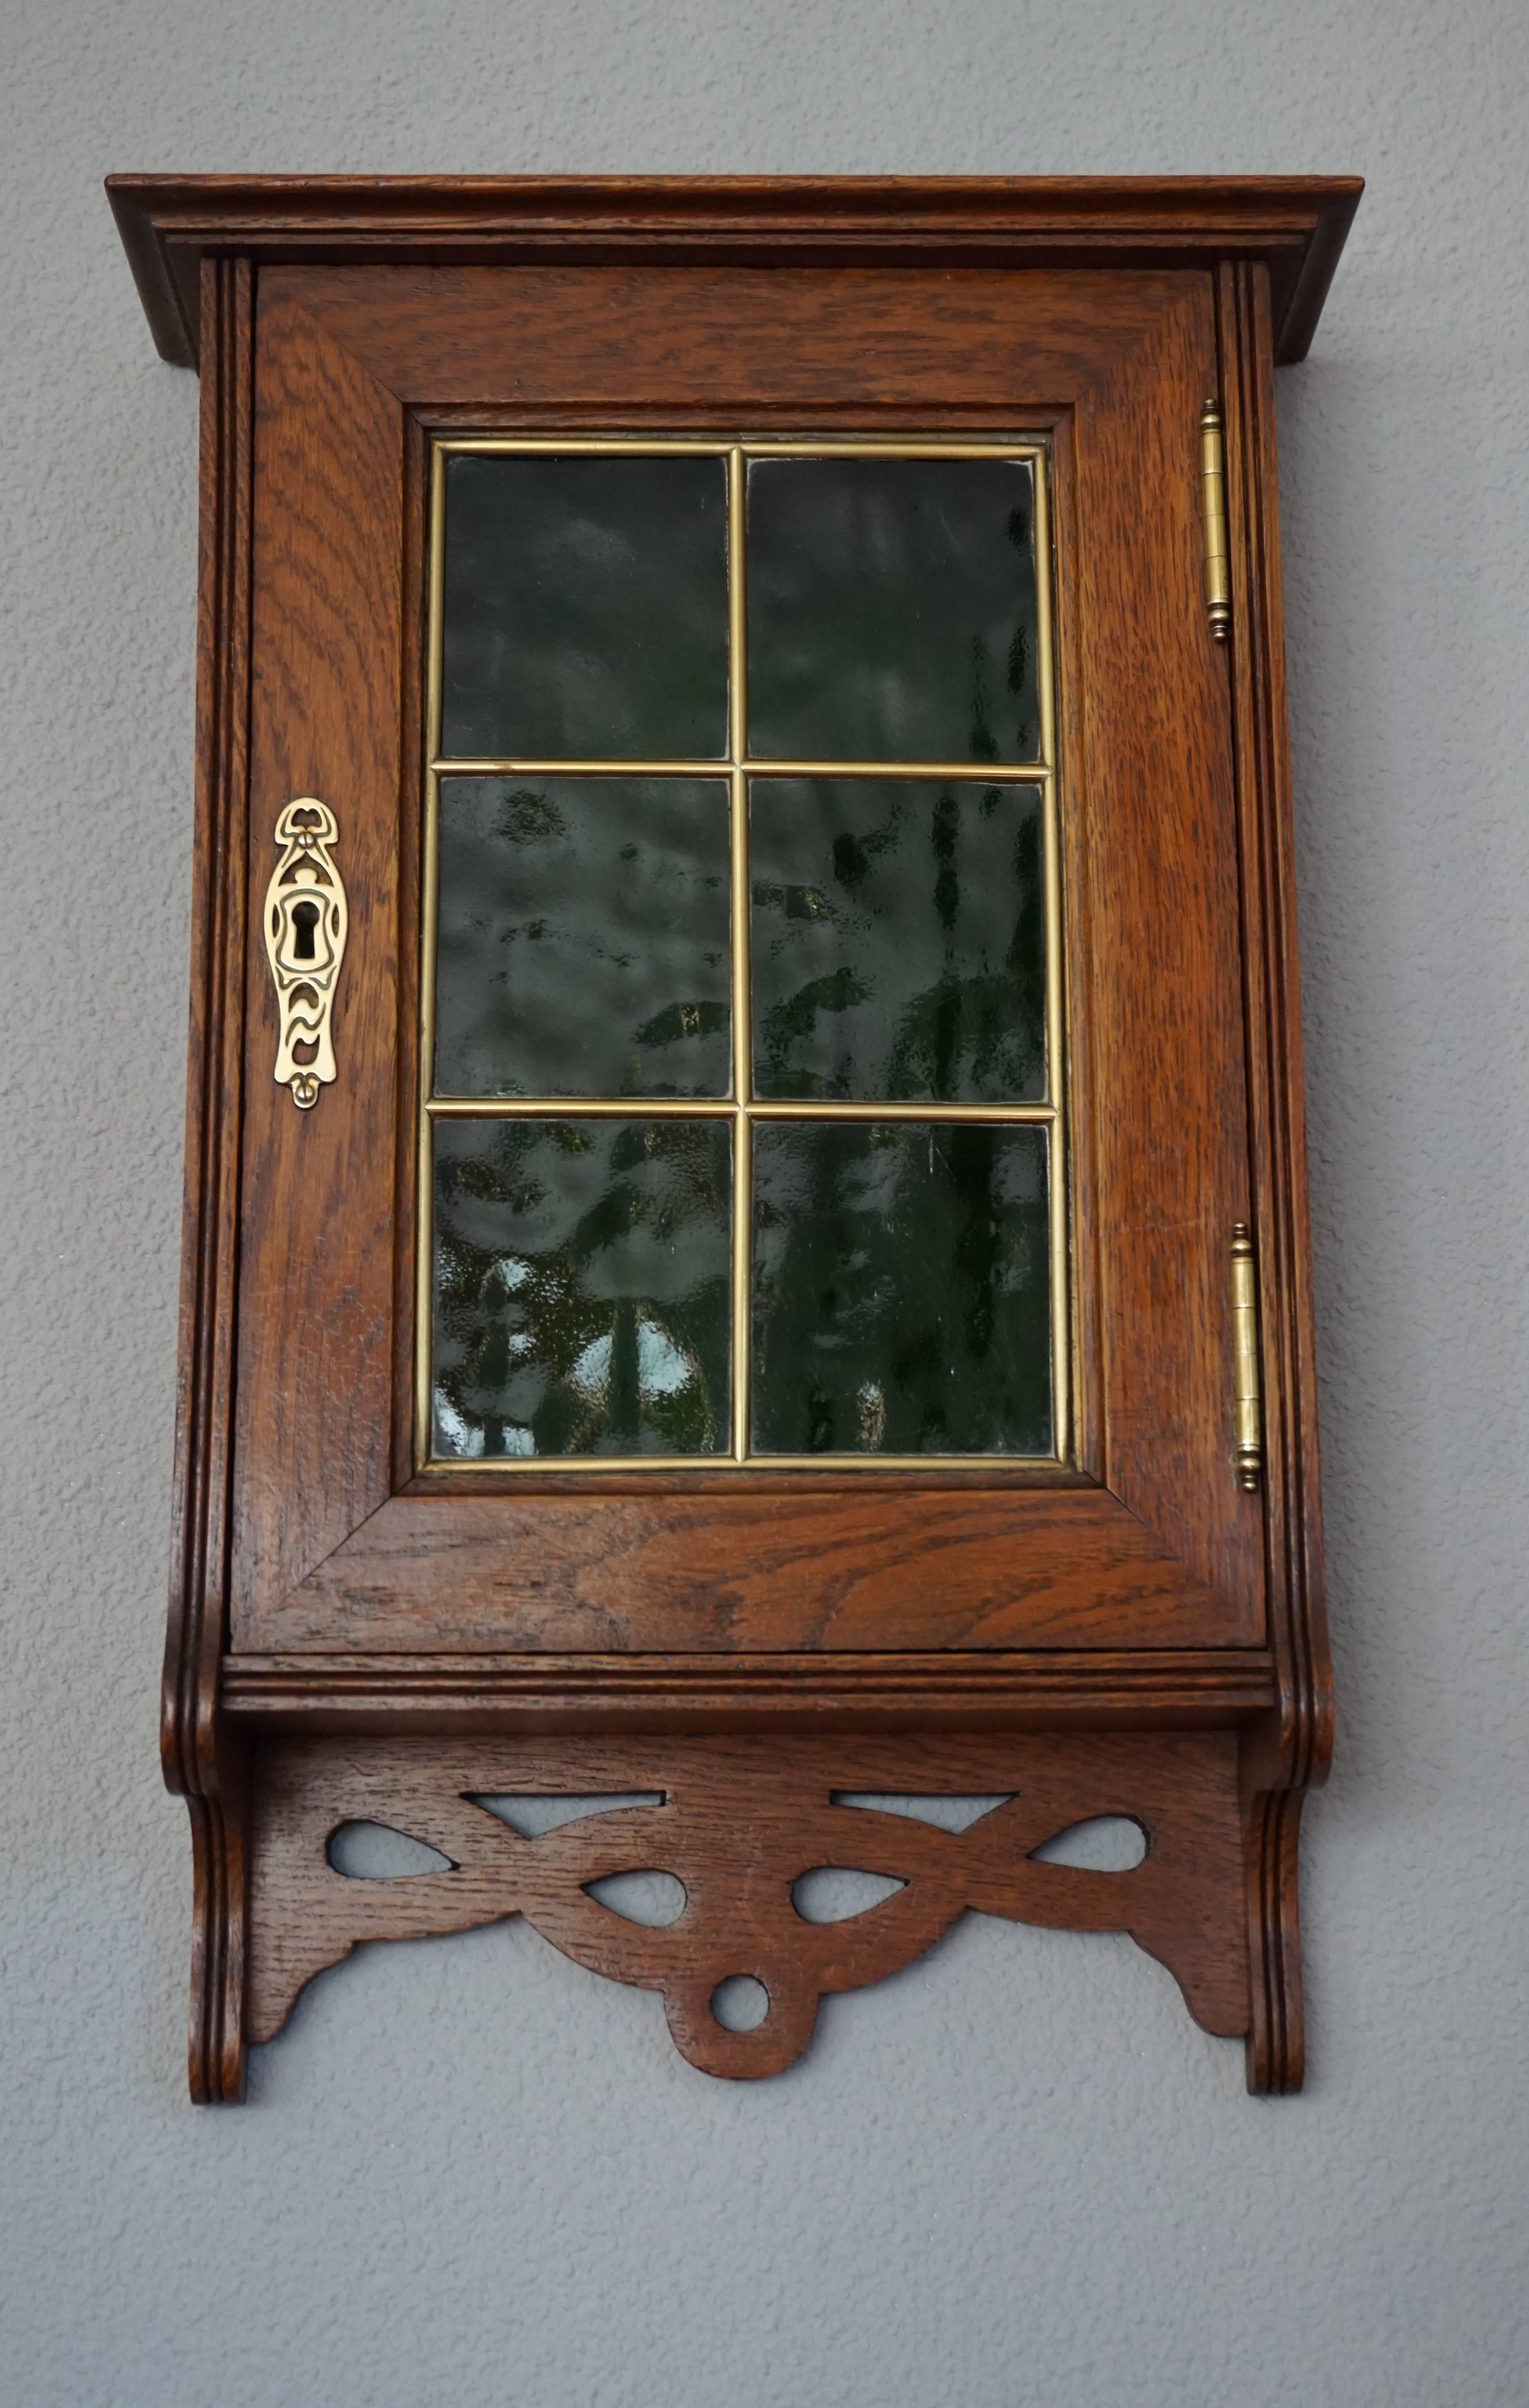 Beautiful and practical, antique wall cabinet with perfect working lock and key.

This handcrafted, early 1900's oak wall cabinet is a real beauty. The warm patina, the stylish shape, the mint condition and the antique cathedral glass are a match